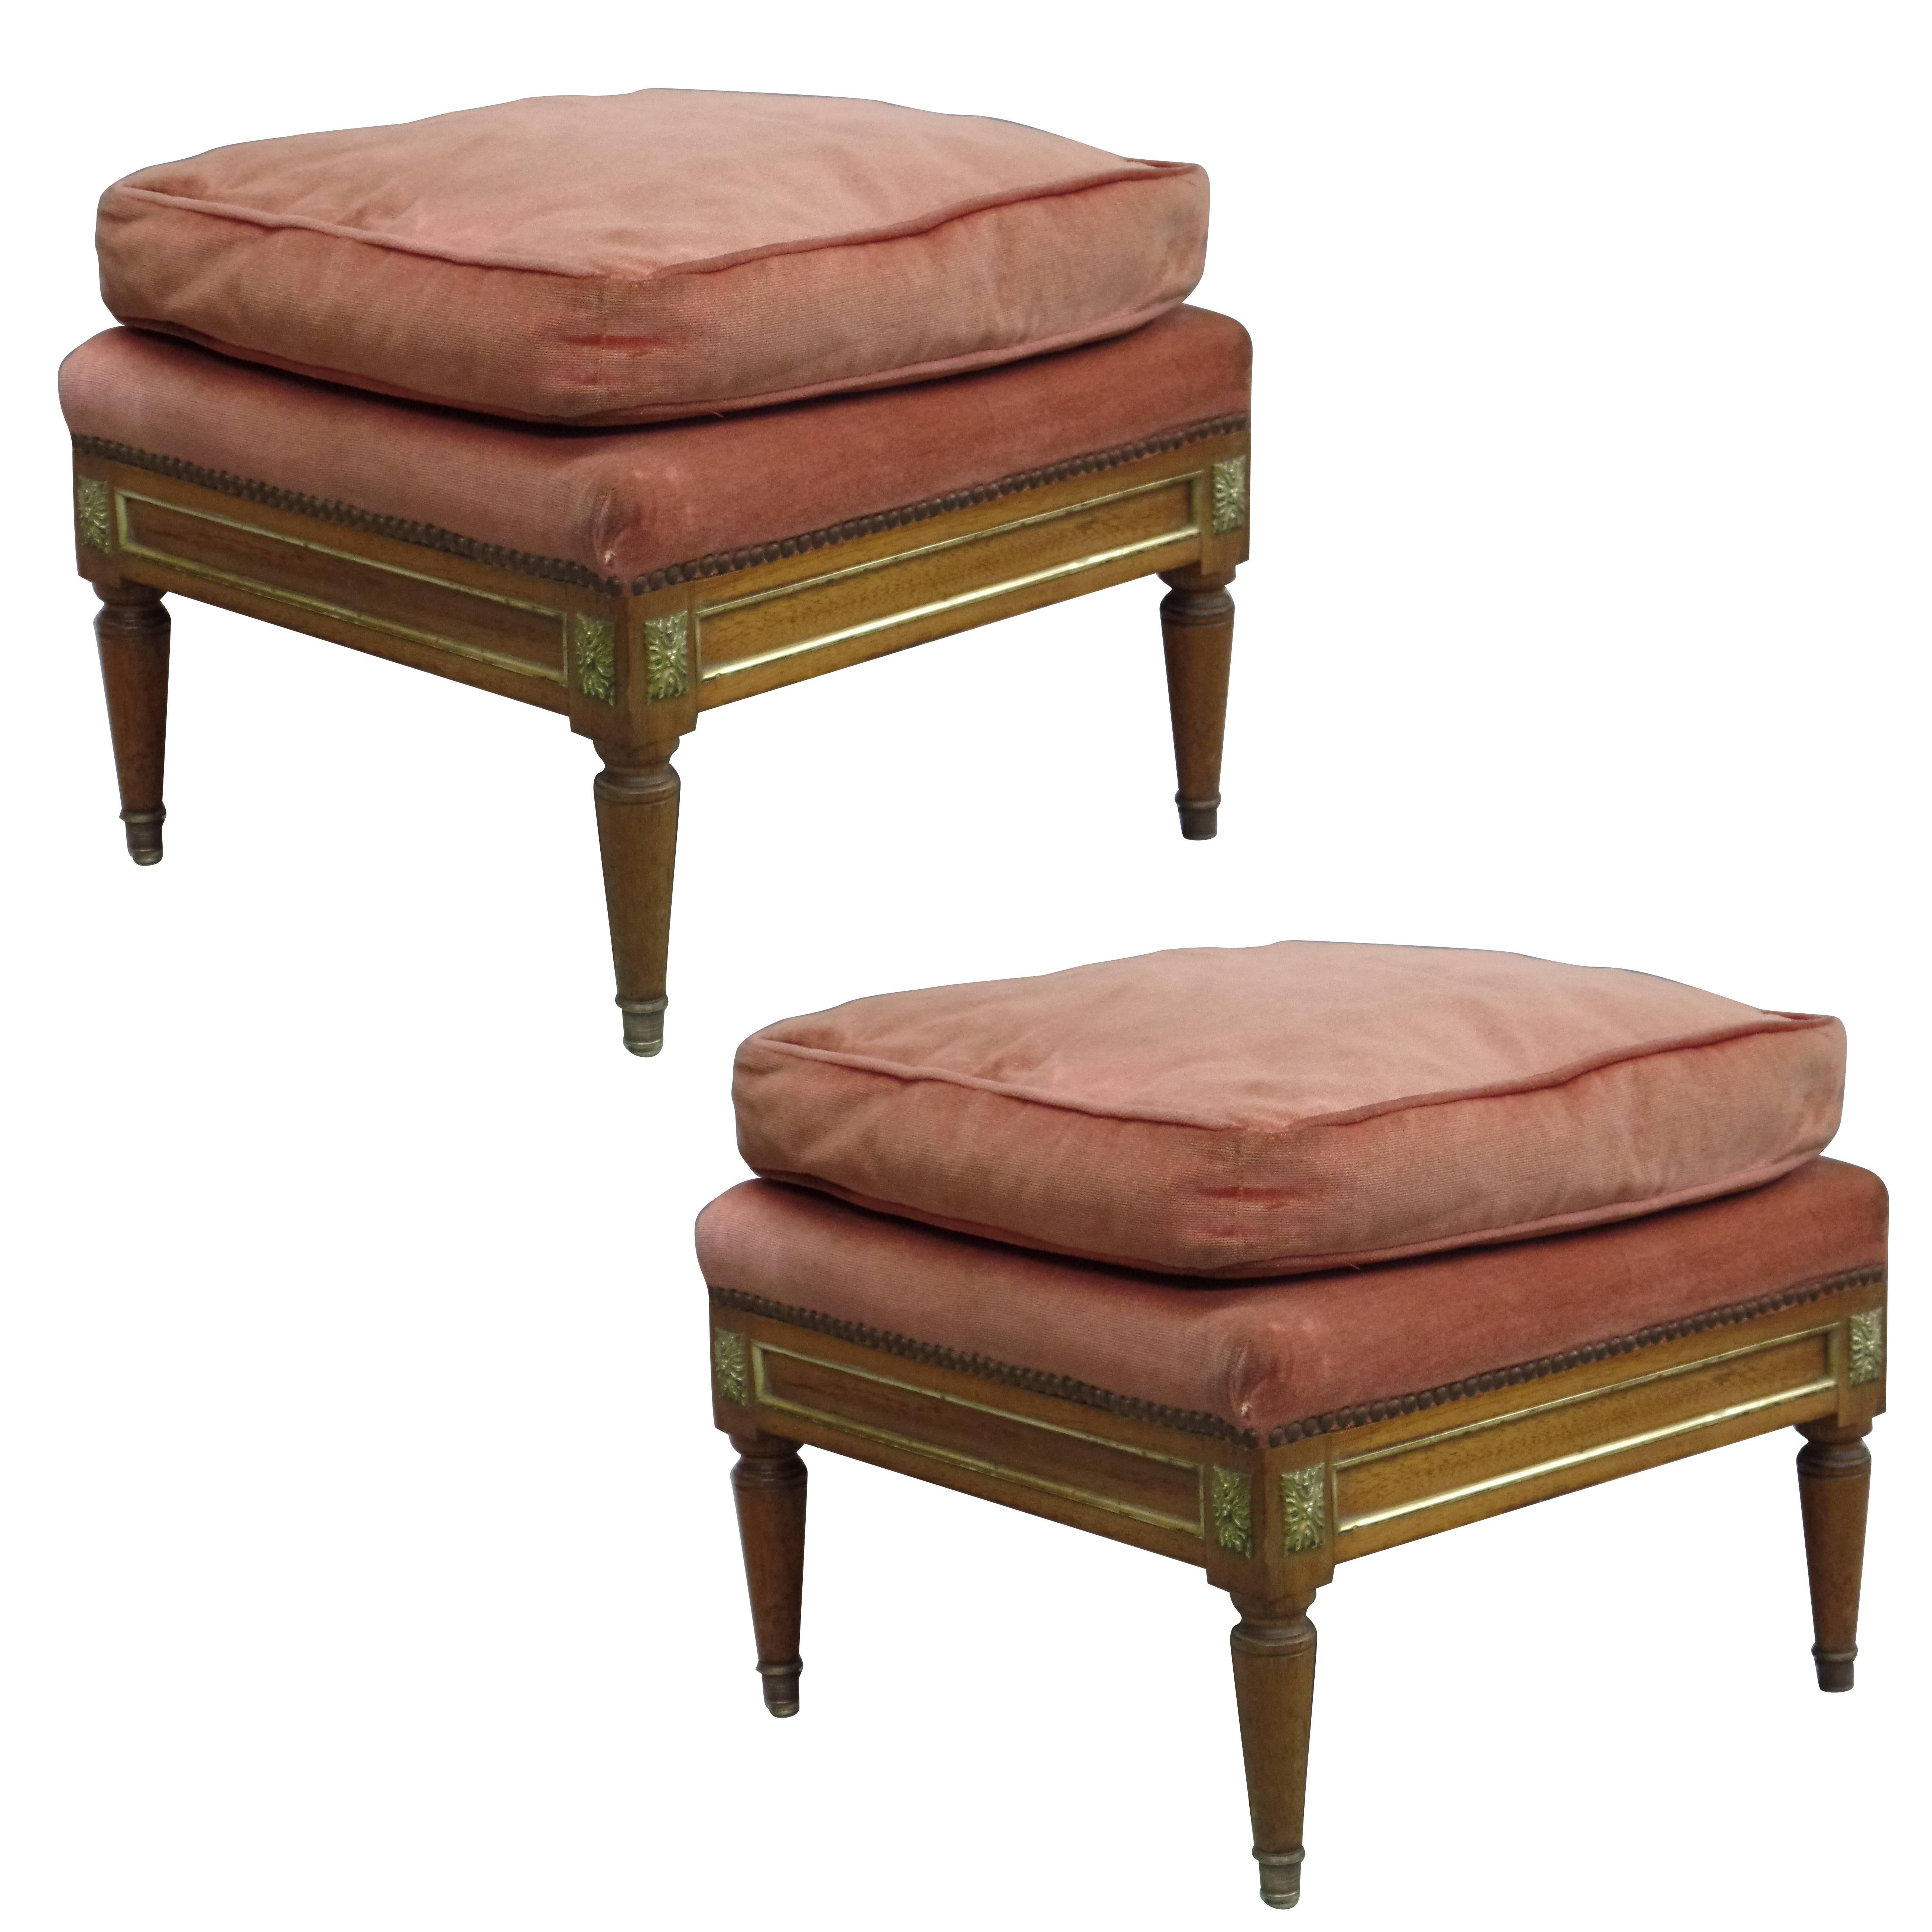 Pair of French Modern Neoclassical Stools / Benches Attributed to Jansen